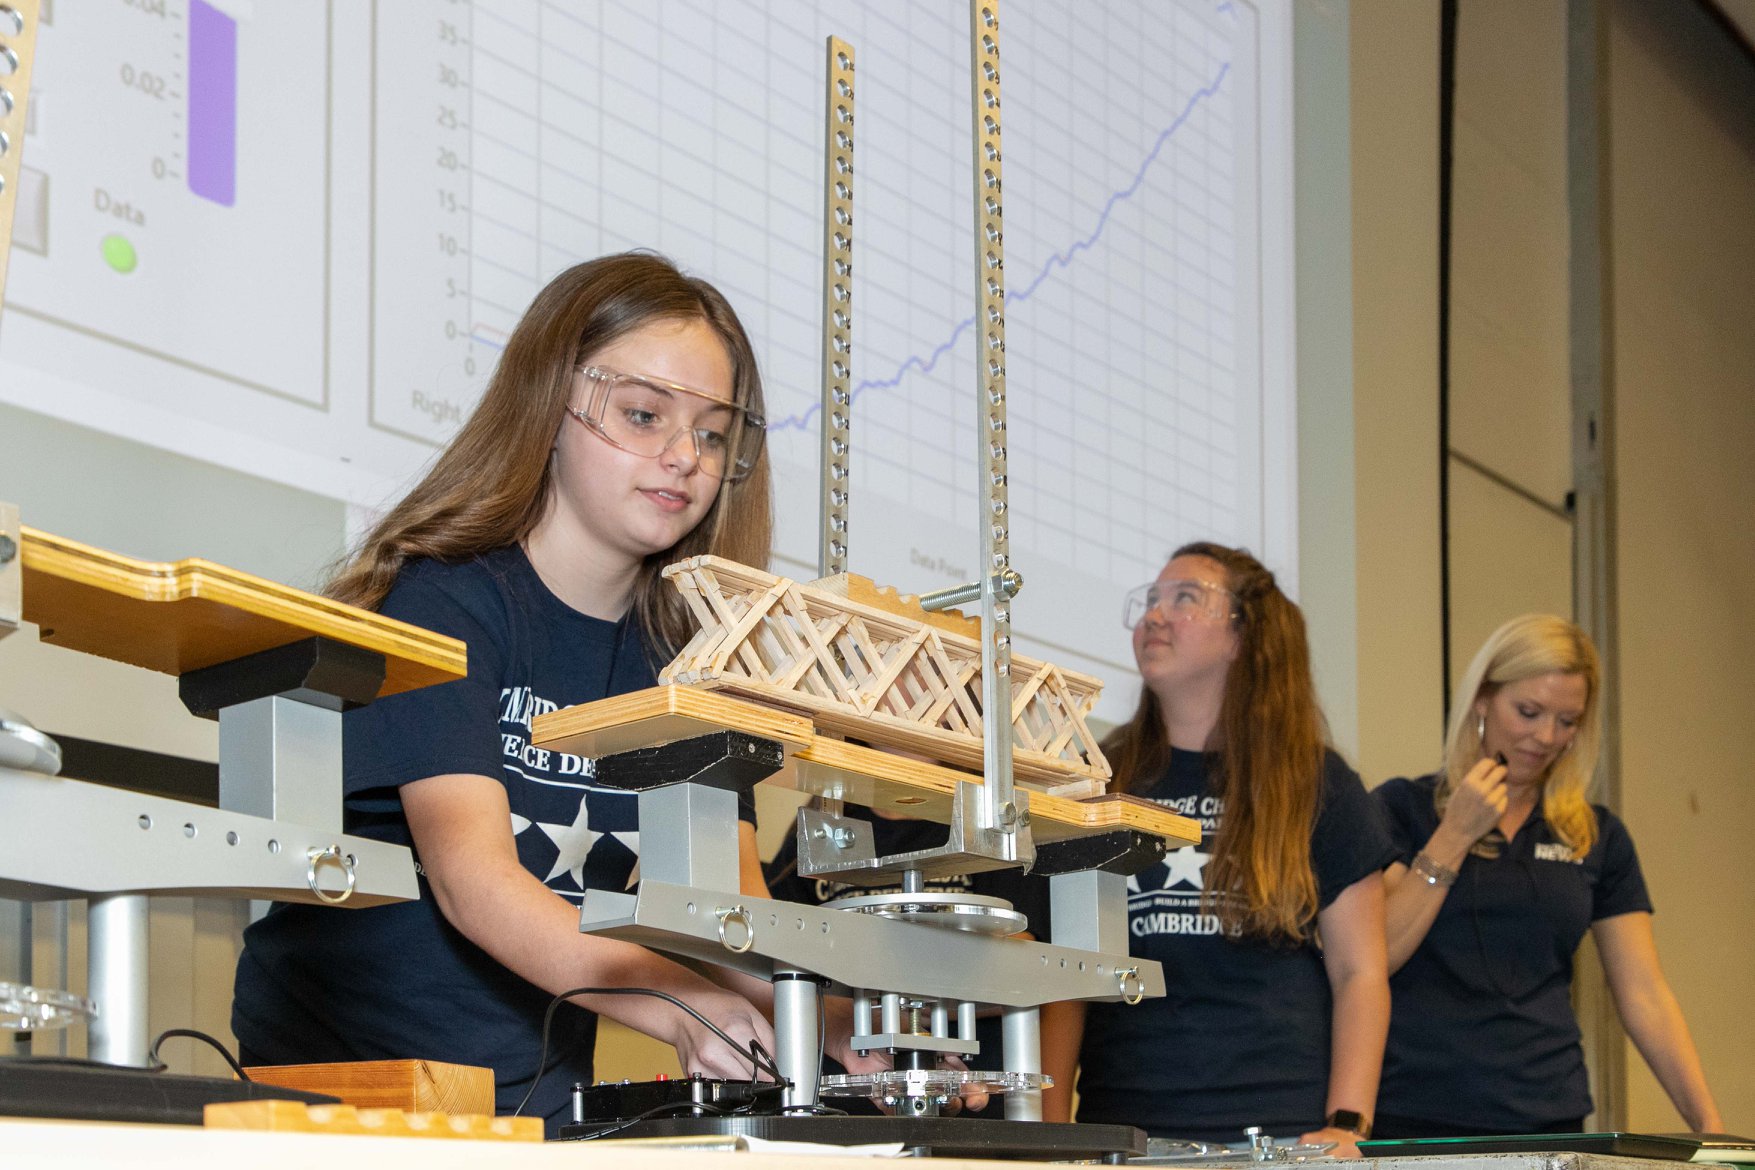 42 Teams Competed in the USF-Selmon Balsa Bridge Design Competition. Winners Announced